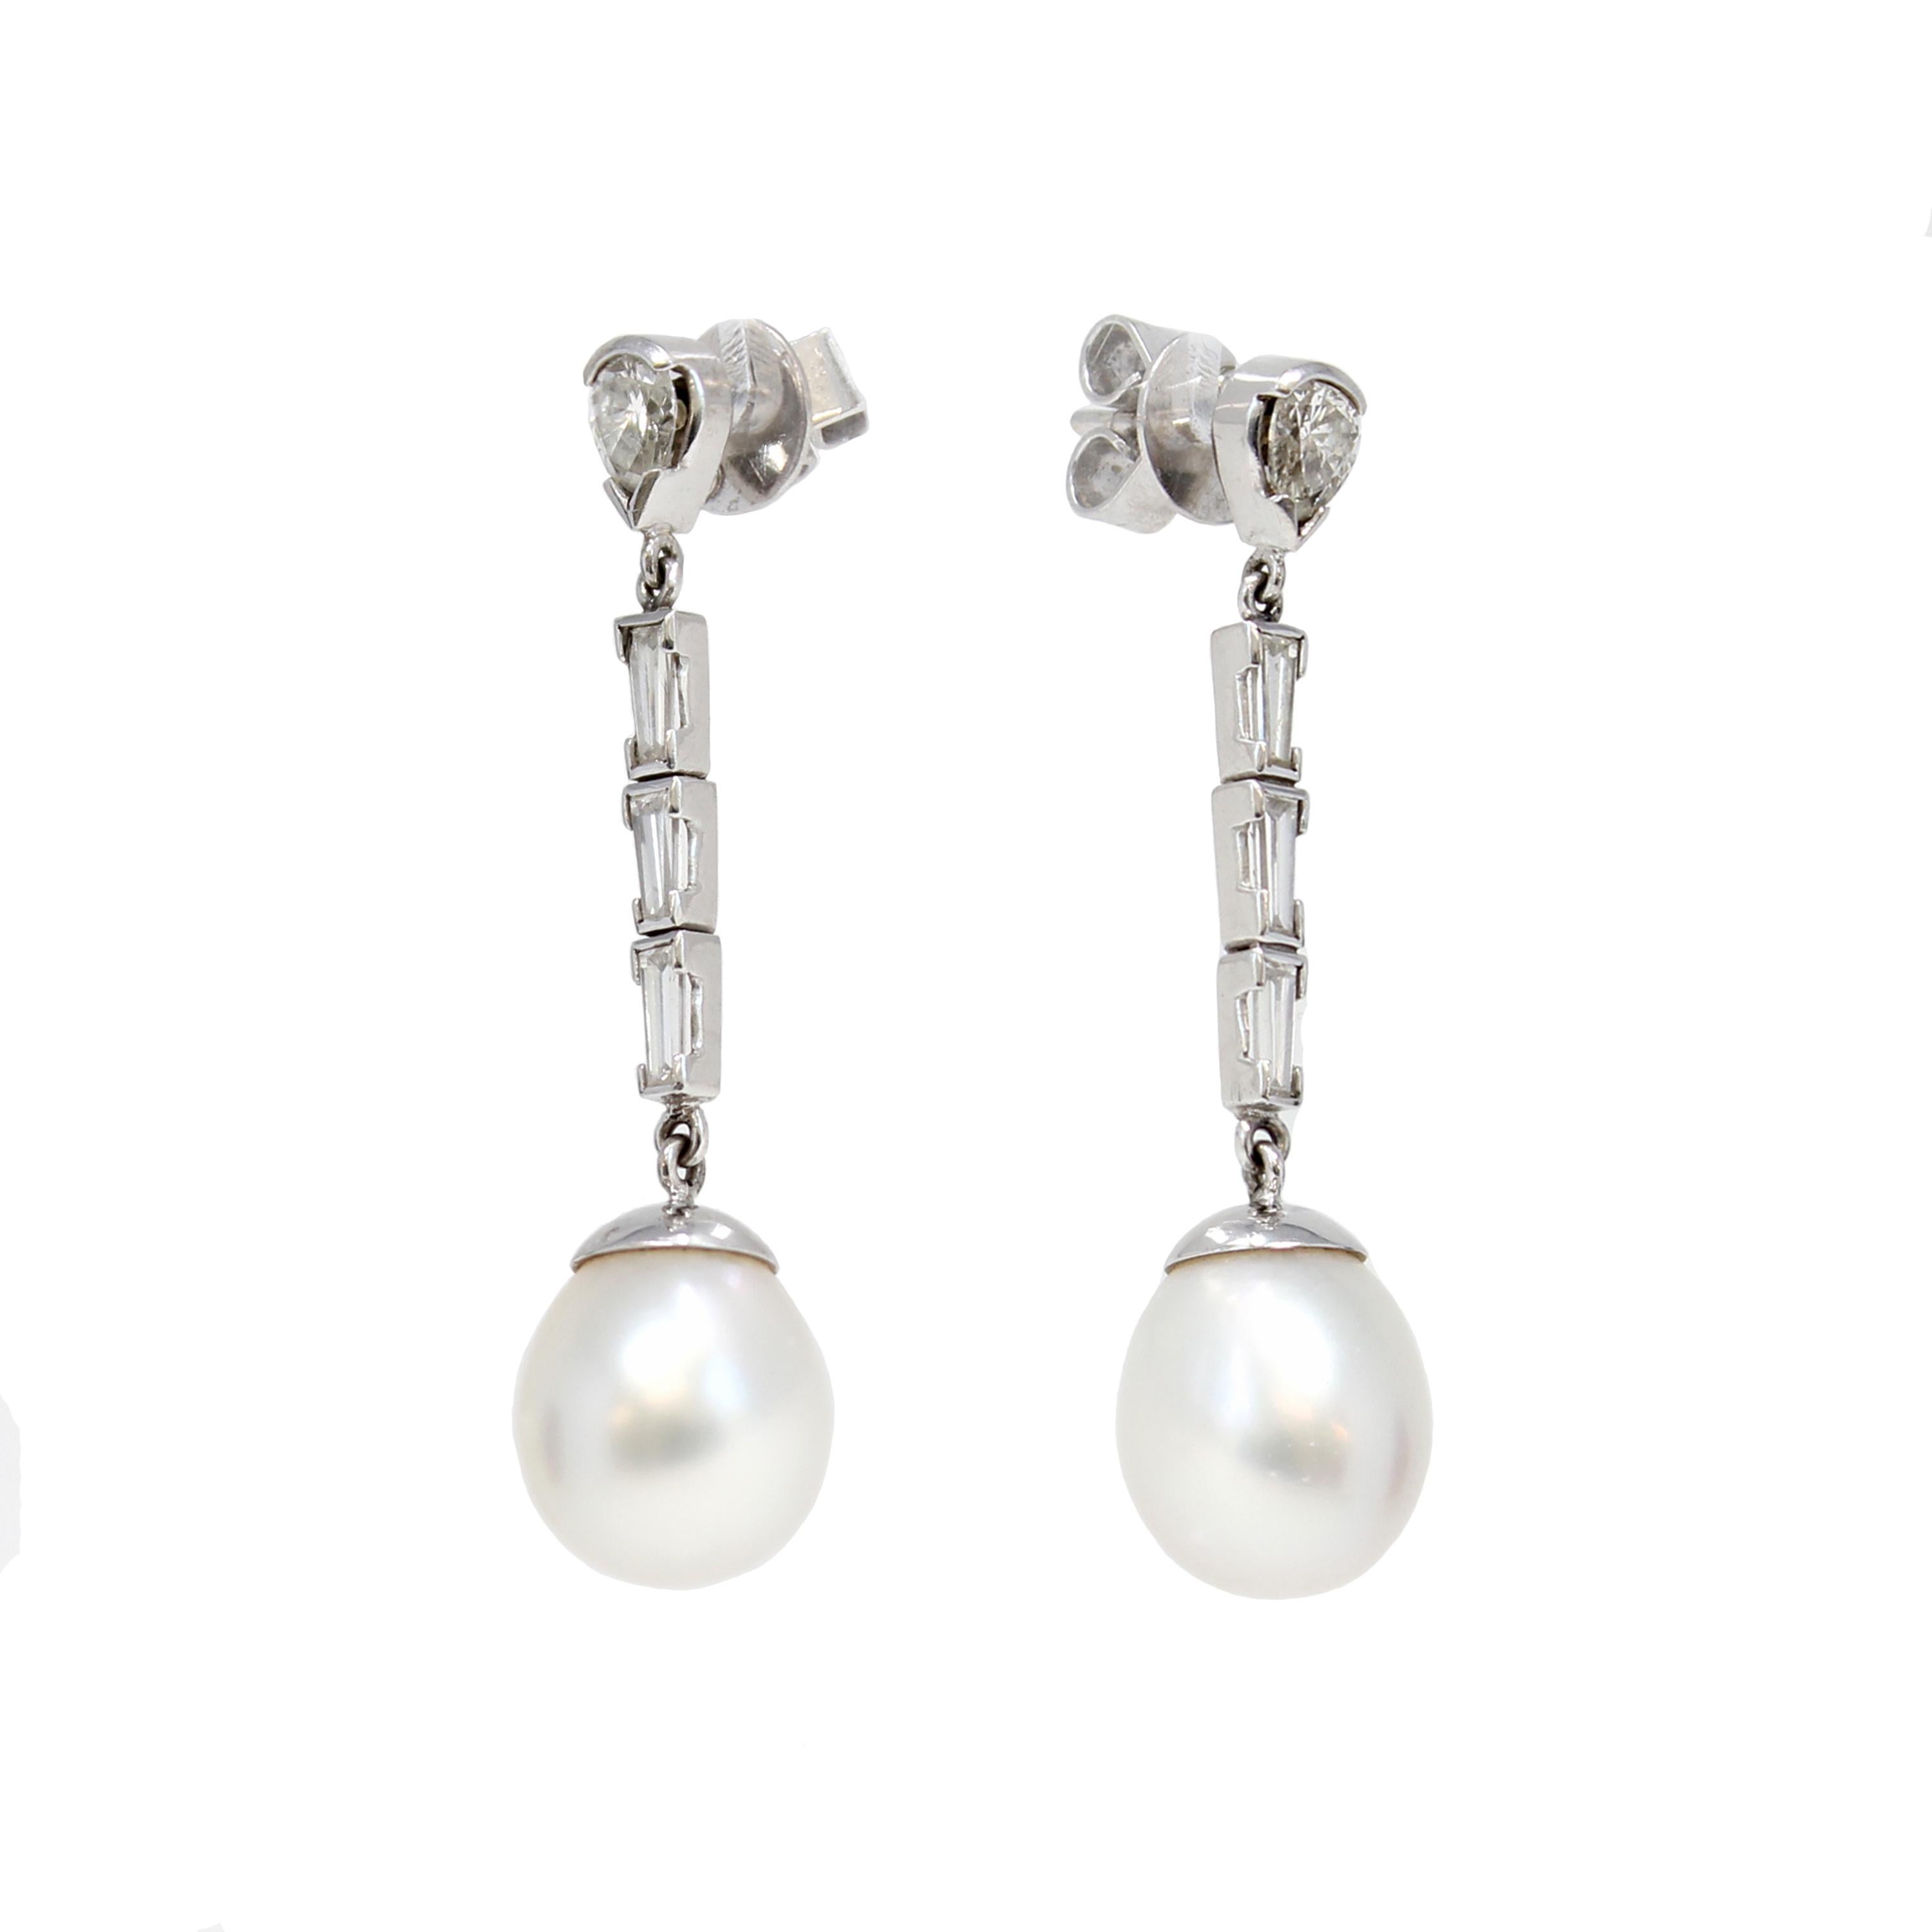 A pair of Italian South Sea Pearl and Diamond dangling earrings in 18K white gold, circa 1960. Created in Italy during the mid-century period, each of this pair of earrings features an Australian 11.5mm white drop-shape Pearl with very good luster